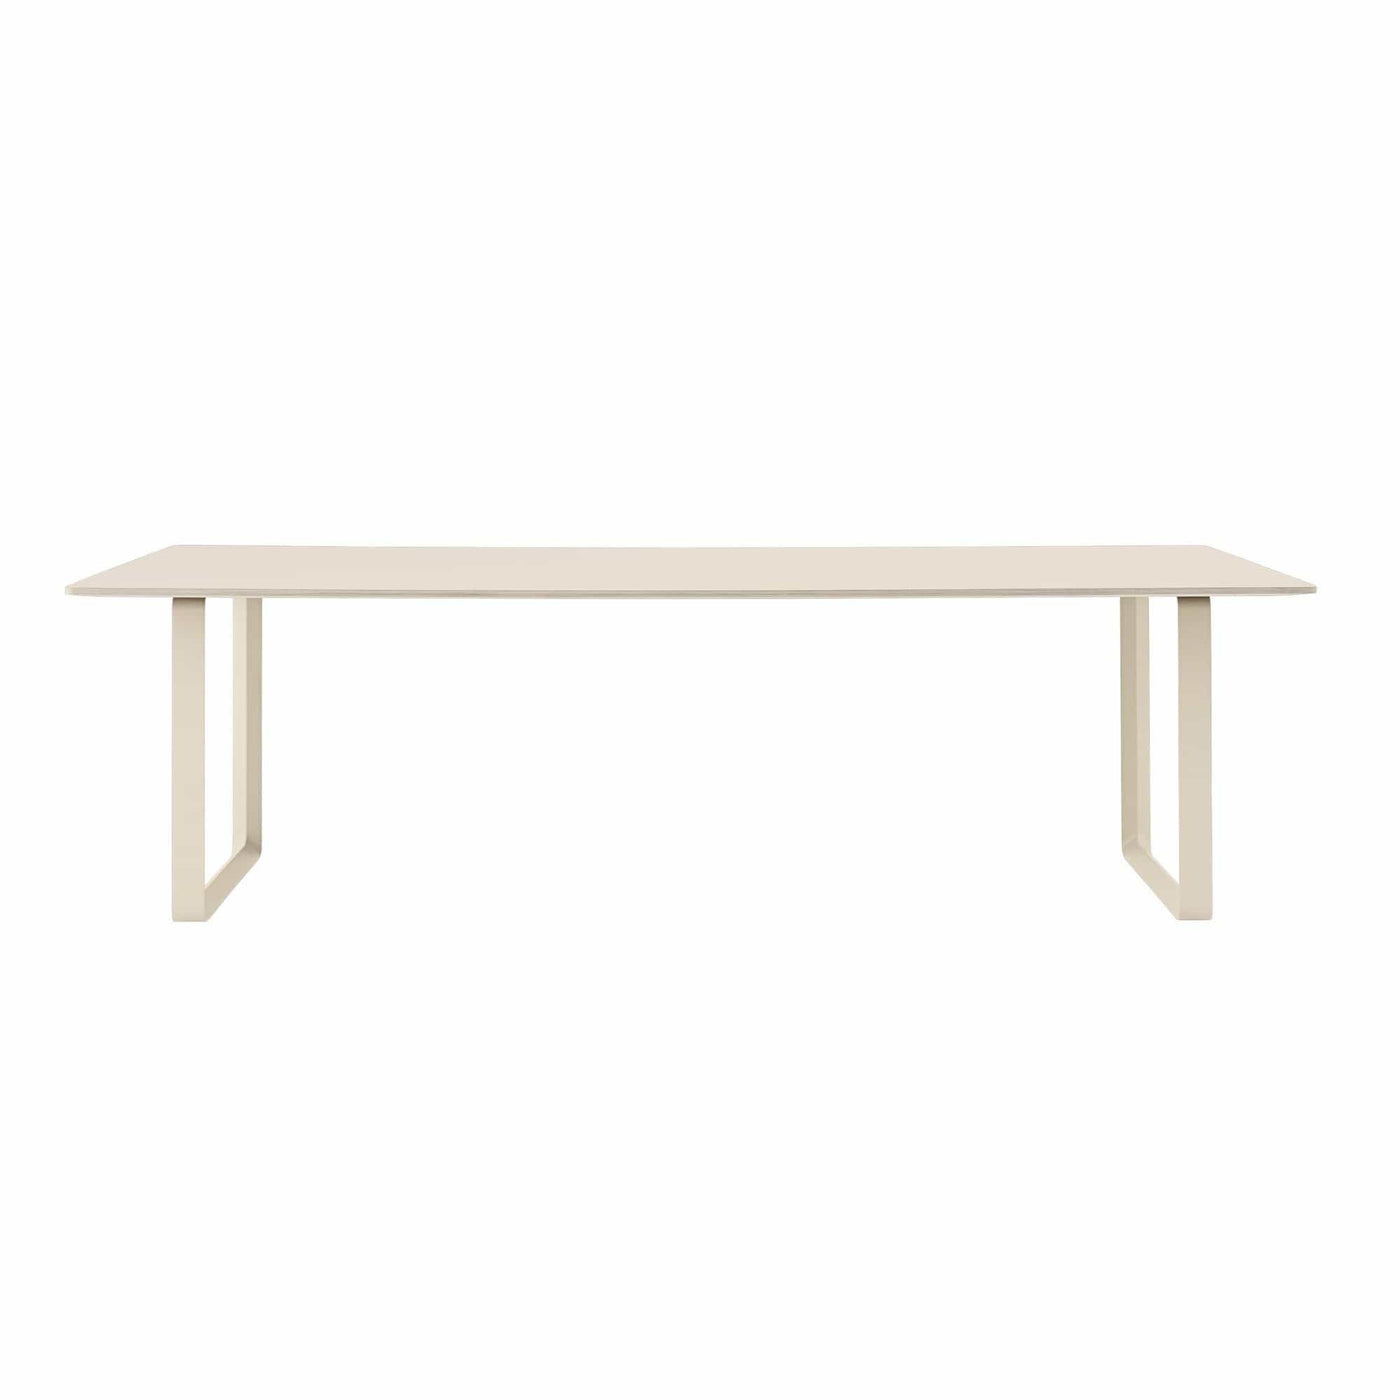 Muuto 70/70 Sand/Sand 255x table. Shop online at someday designs  #colour_sand-sand